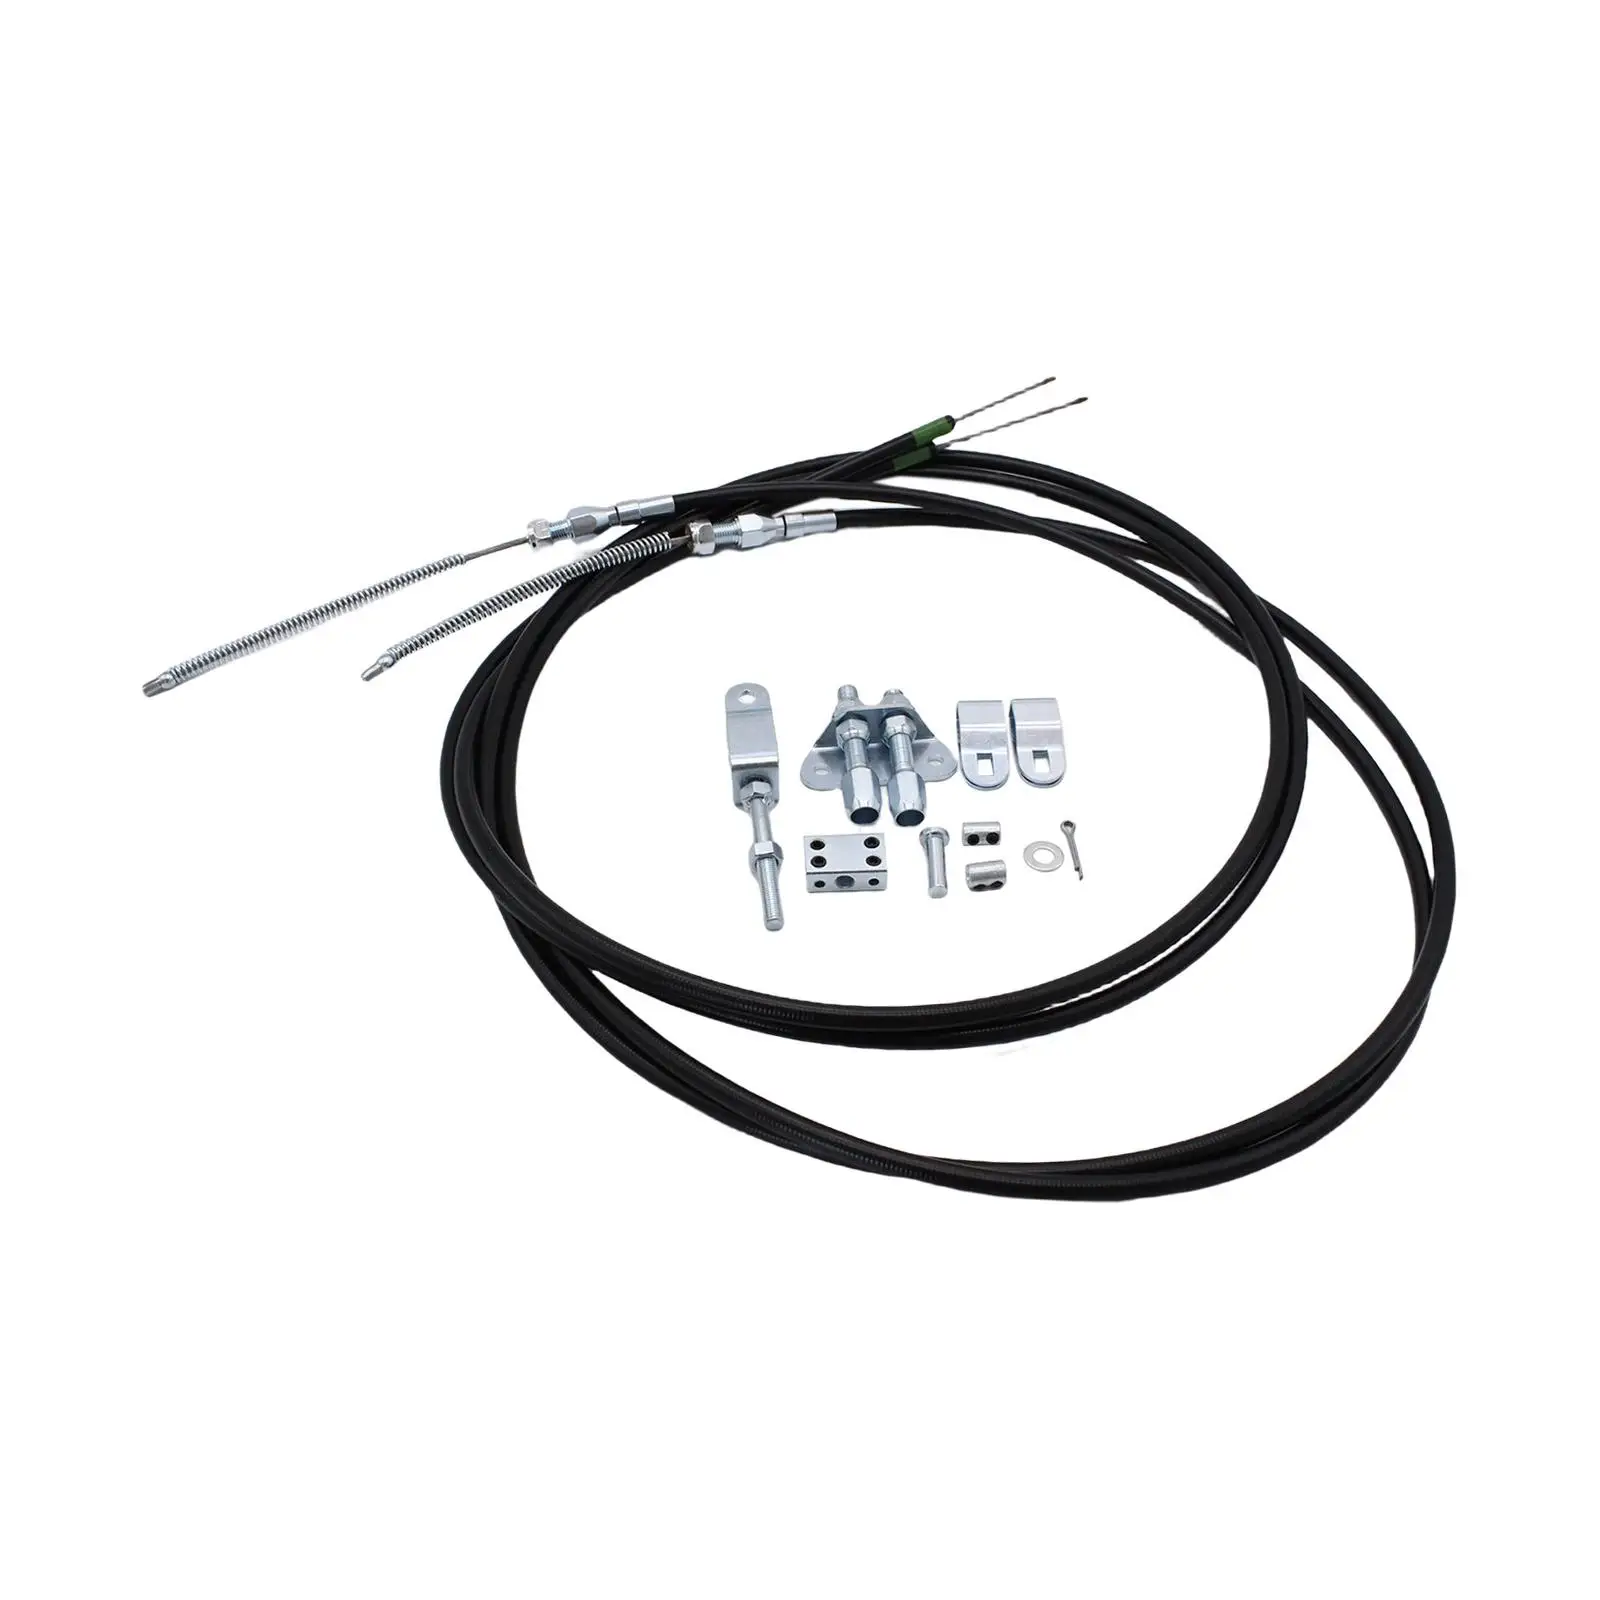 Universal Parking Brake Cable Kit 330-9371 Flexible Wear Resistant for Disc or Drum Brakes